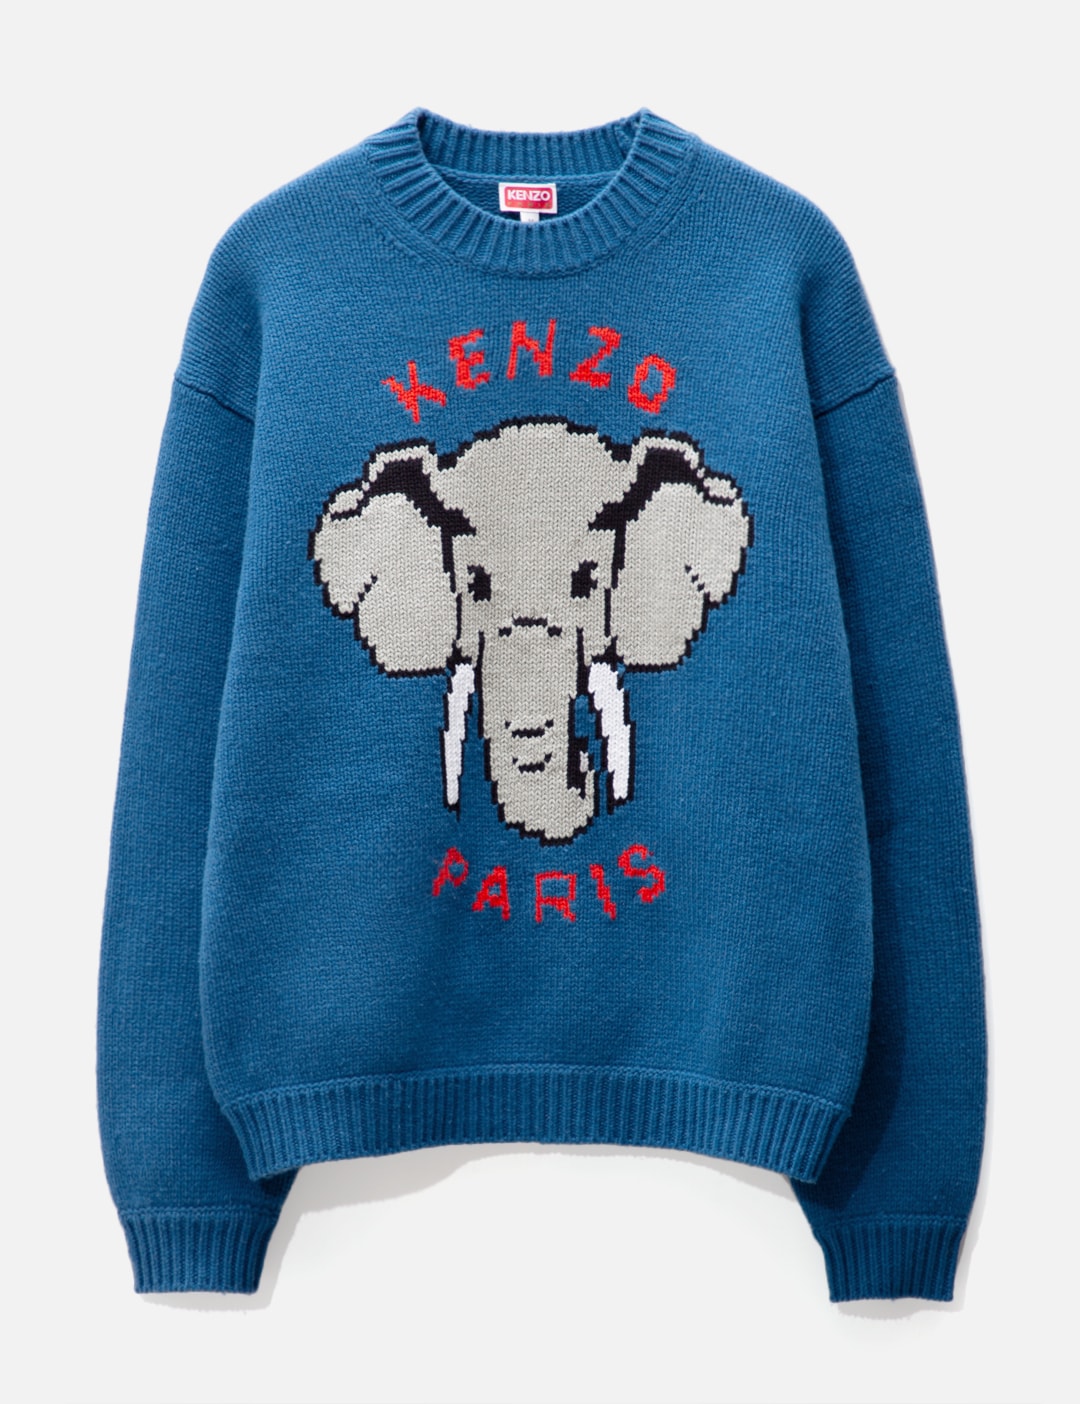 Diversen Moet bereiken Kenzo - 'Kenzo Elephant' Wool Sweater | HBX - Globally Curated Fashion and  Lifestyle by Hypebeast